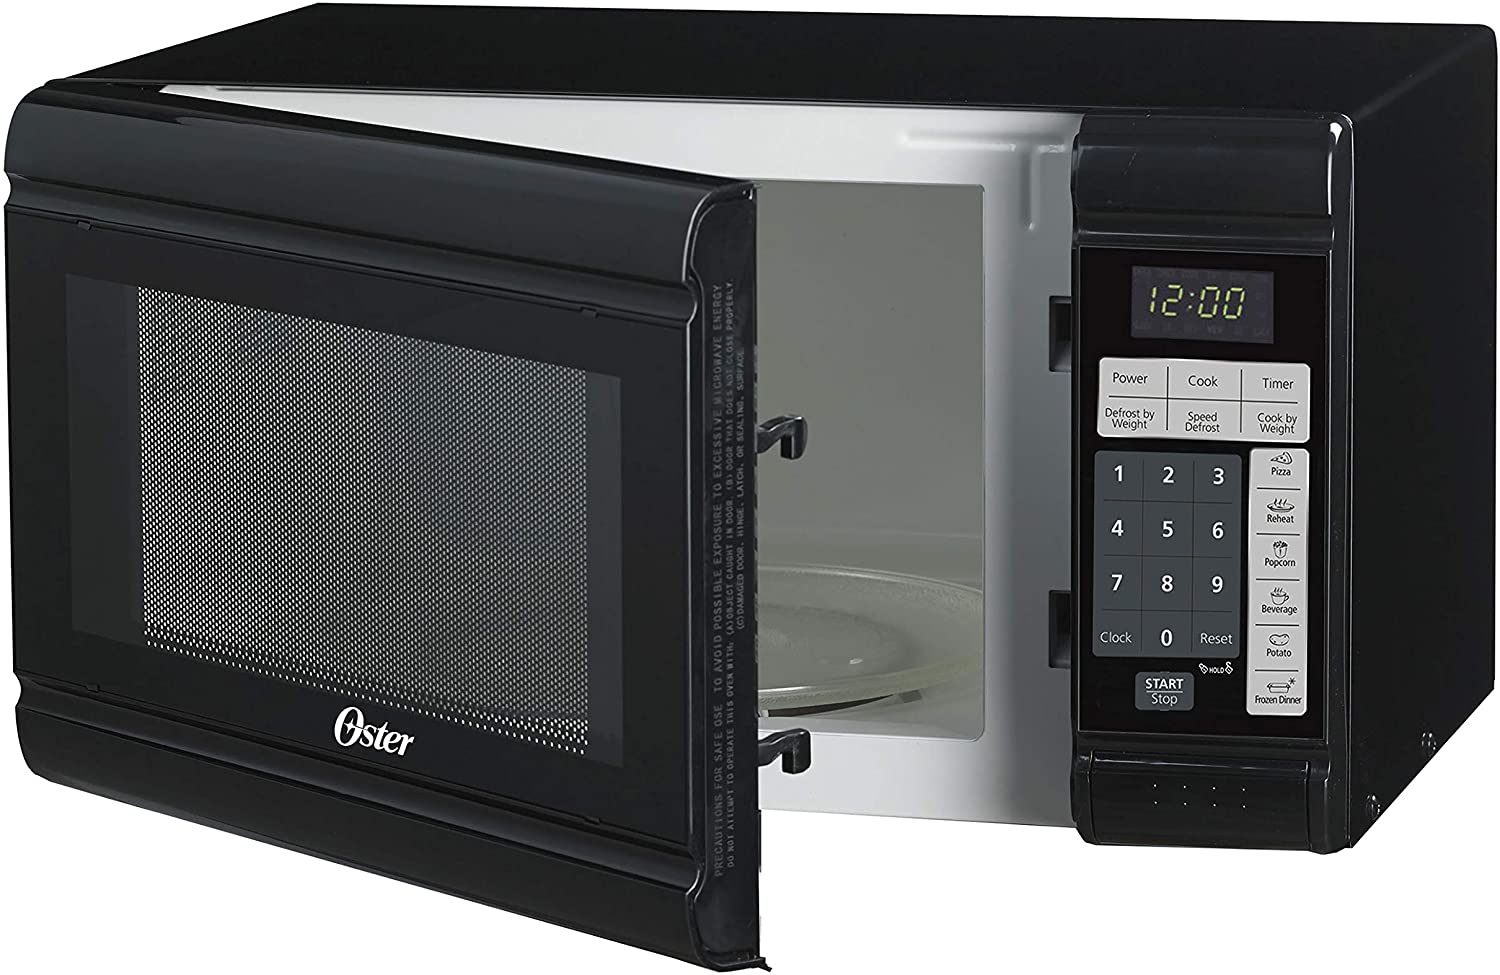 Oster 0.9 Cu. Feet Microwave Oven - Black (900W)